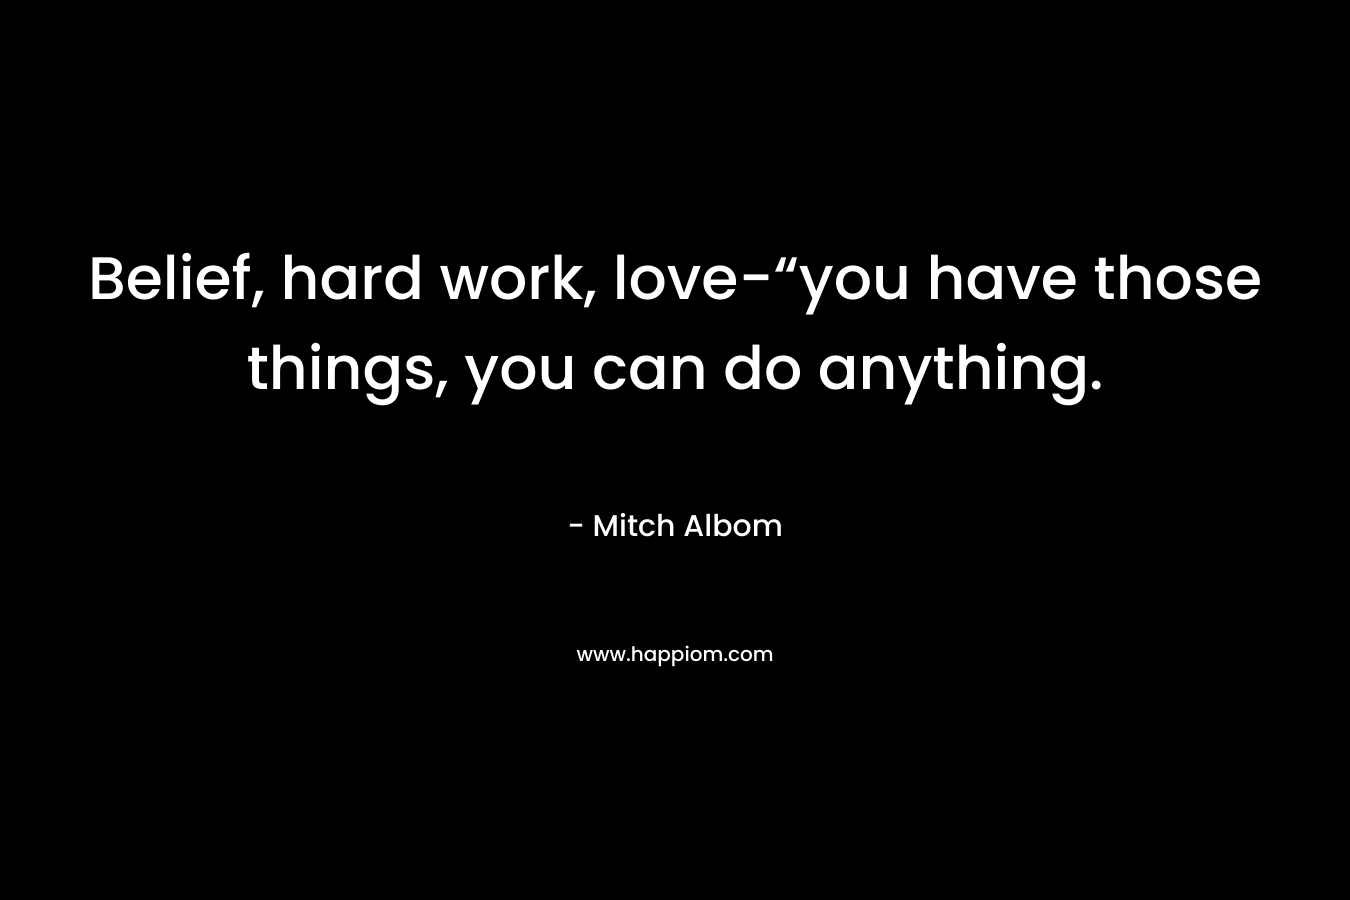 Belief, hard work, love-“you have those things, you can do anything. – Mitch Albom